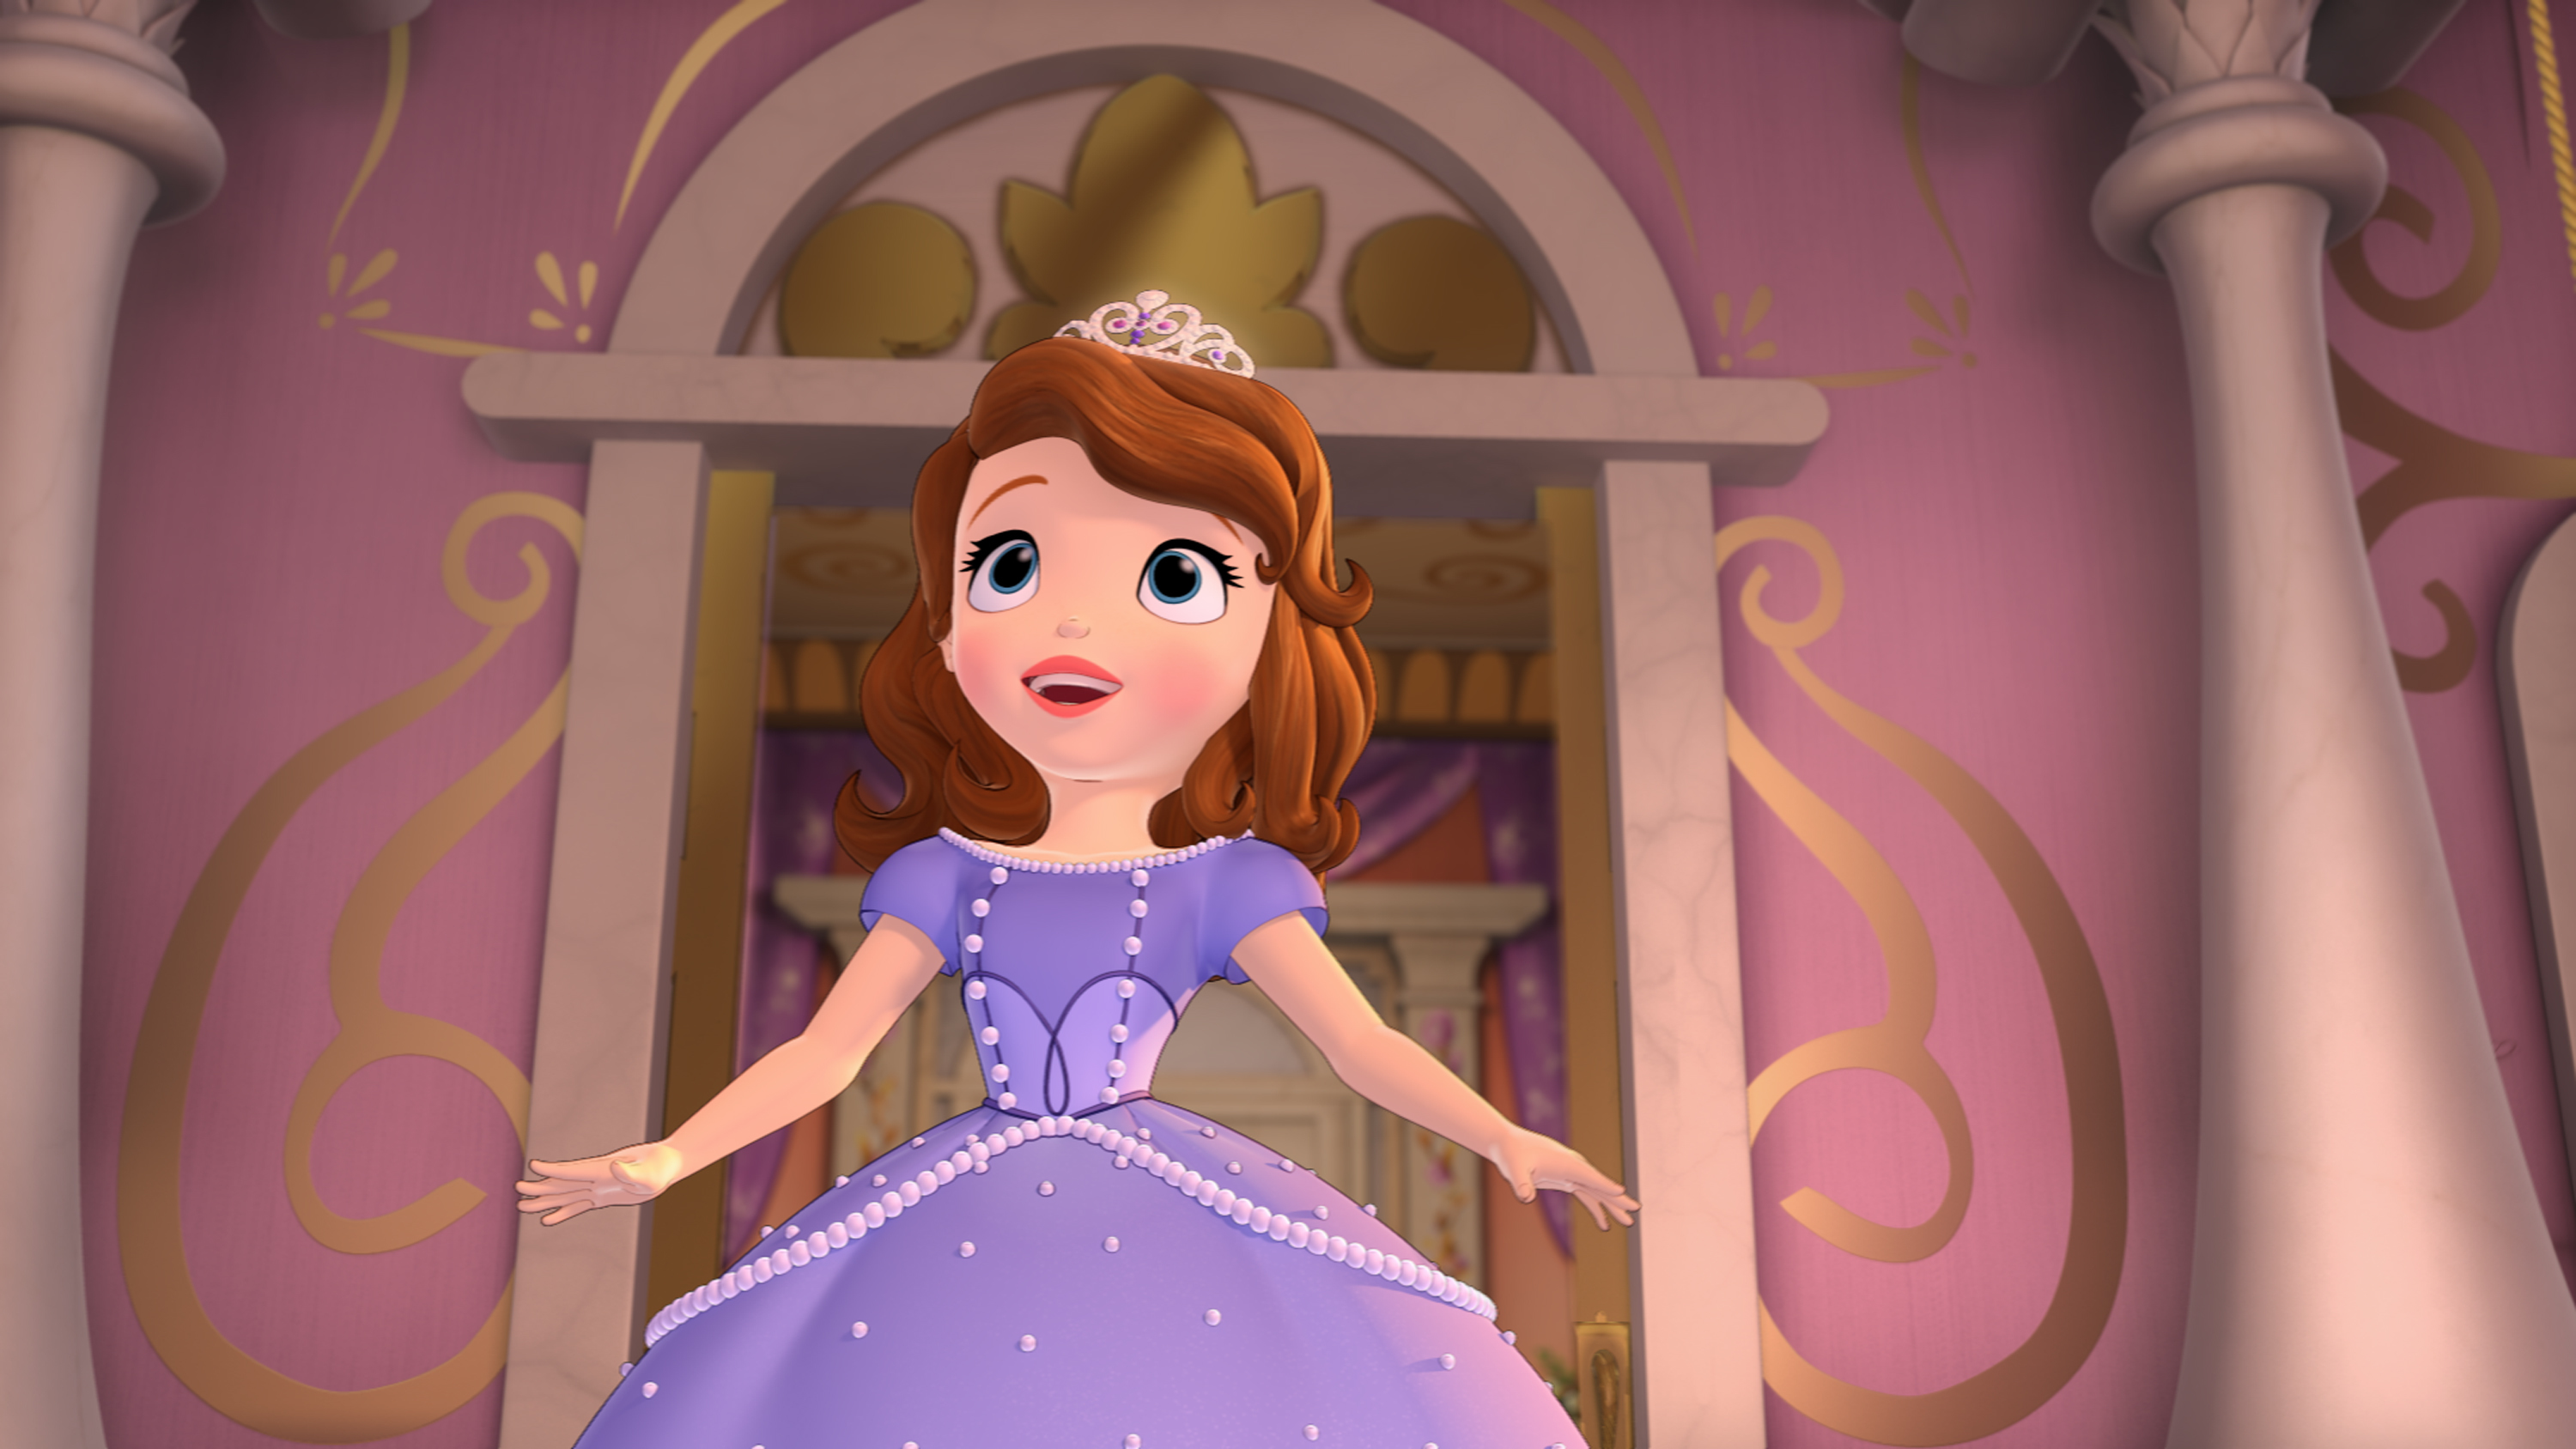 Sofia The First Once Upon A Princess wallpapers.